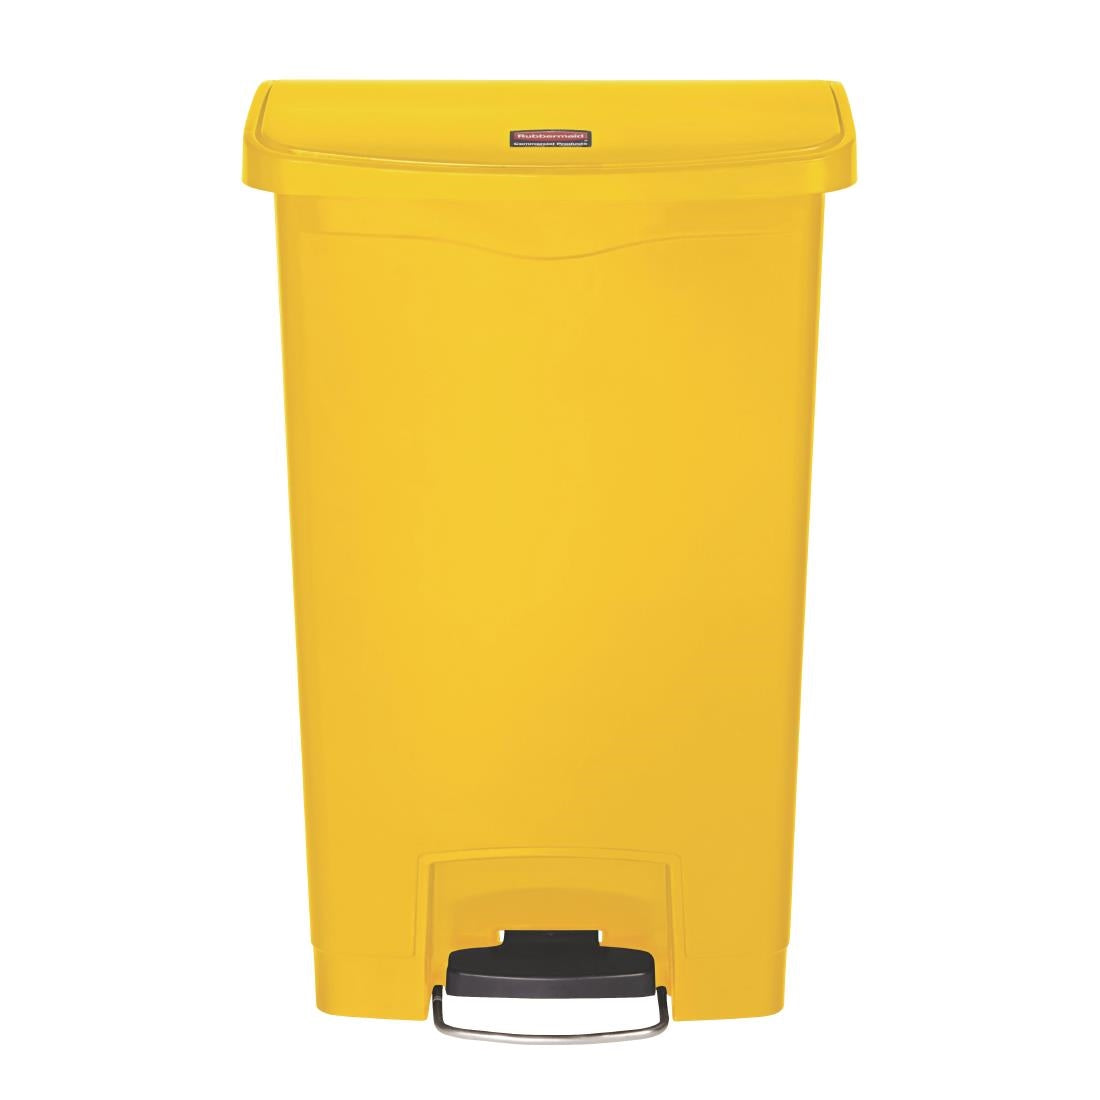 CW585 Rubbermaid Slim Jim Front Step-On Pedal Bin Yellow 50Ltr JD Catering Equipment Solutions Ltd